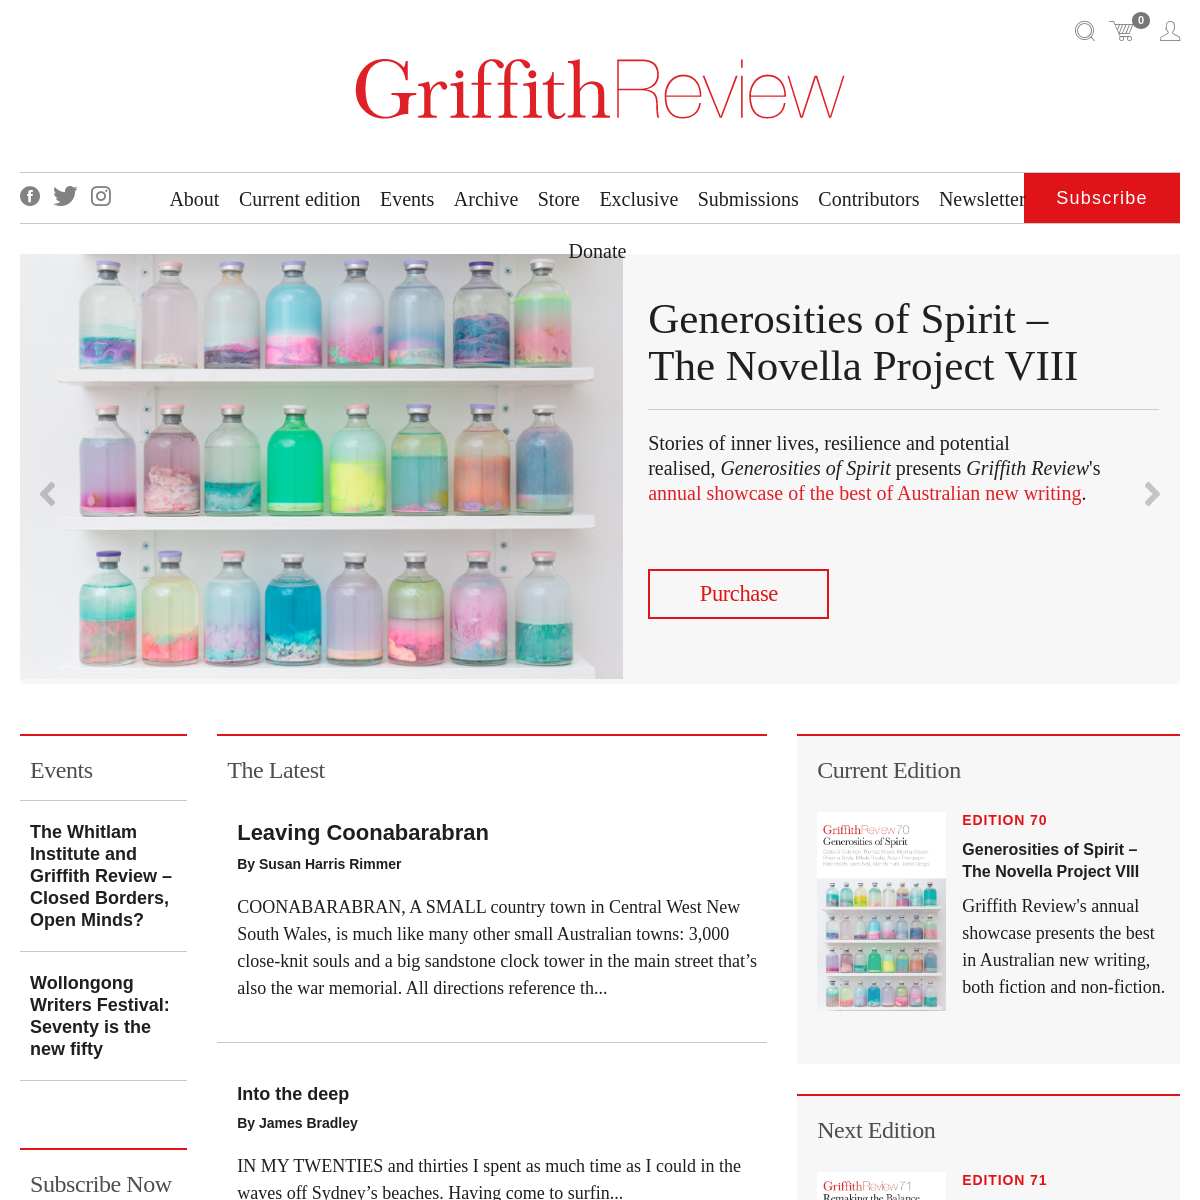 A complete backup of griffithreview.com